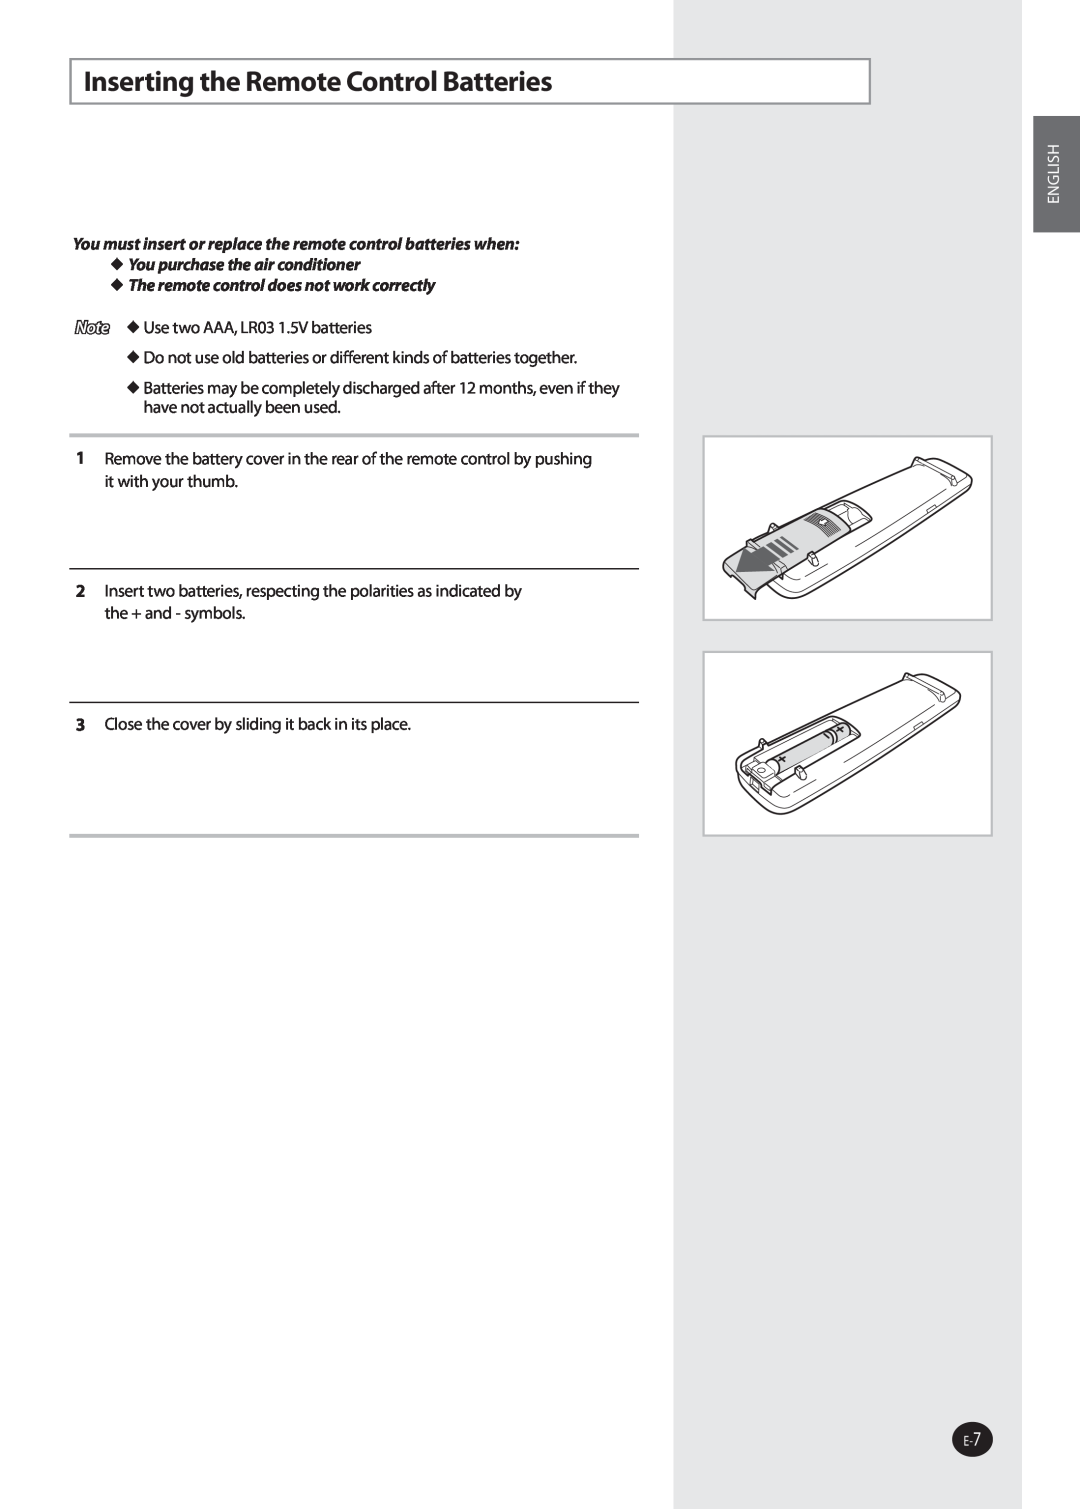 Samsung AQV36W user manual Inserting the Remote Control Batteries, English, The remote control does not work correctly 